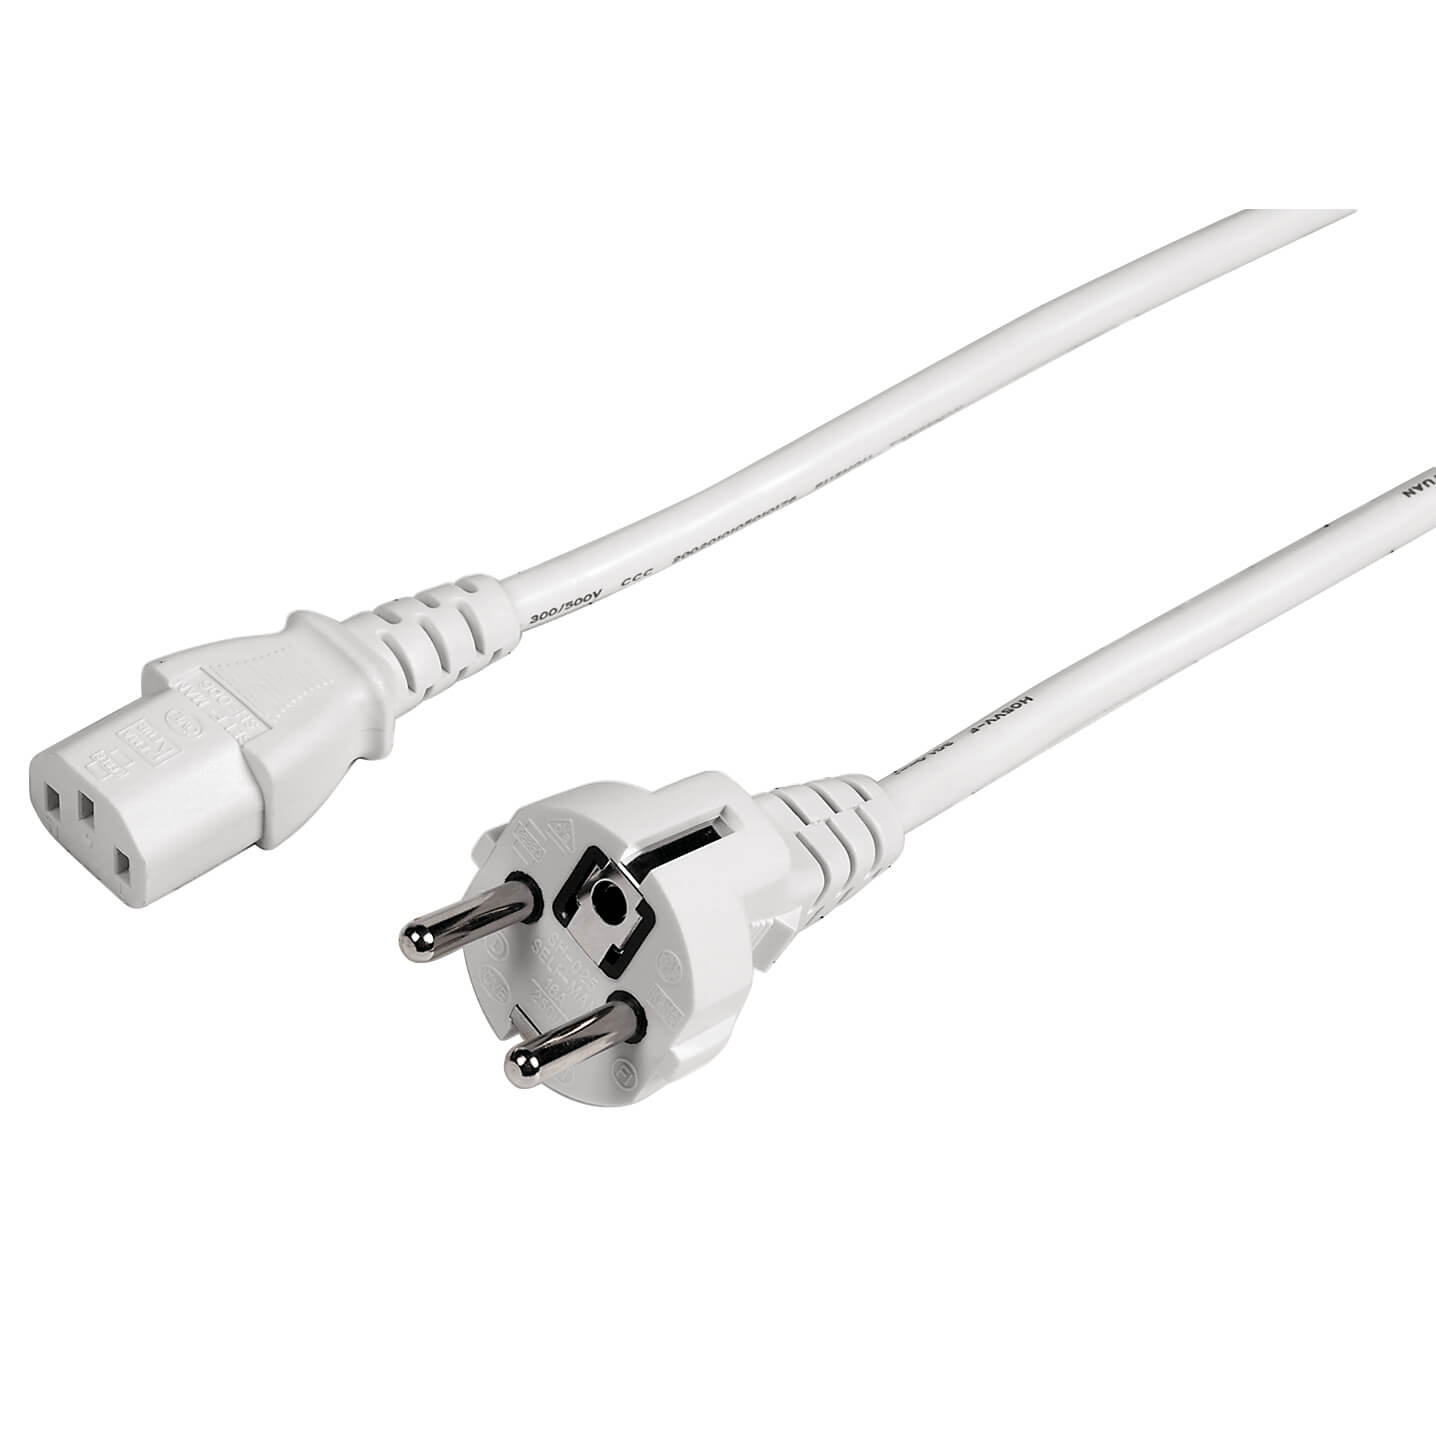 Universal Mains Lead, 5 m, wh ite